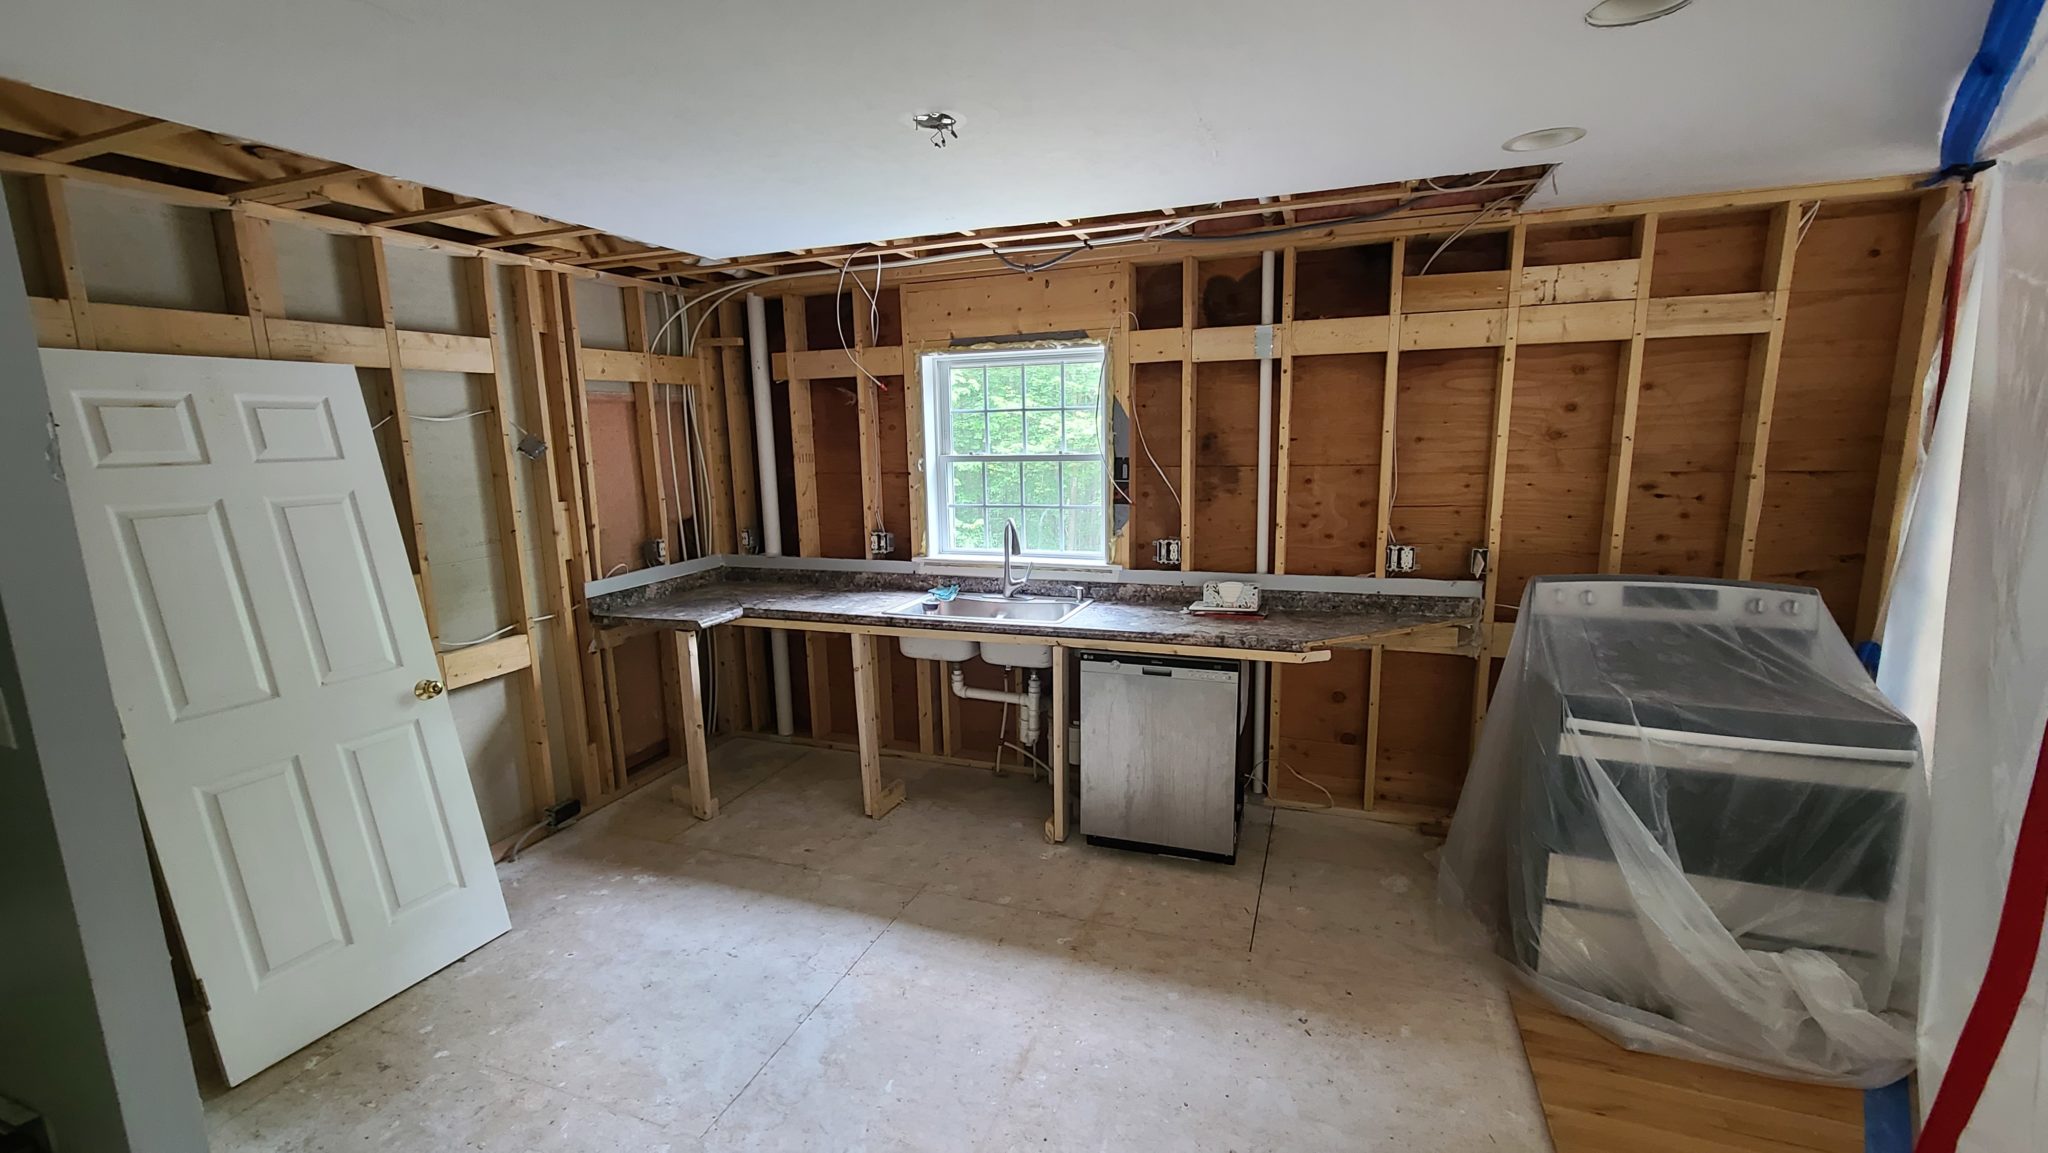 kitchen after the flood